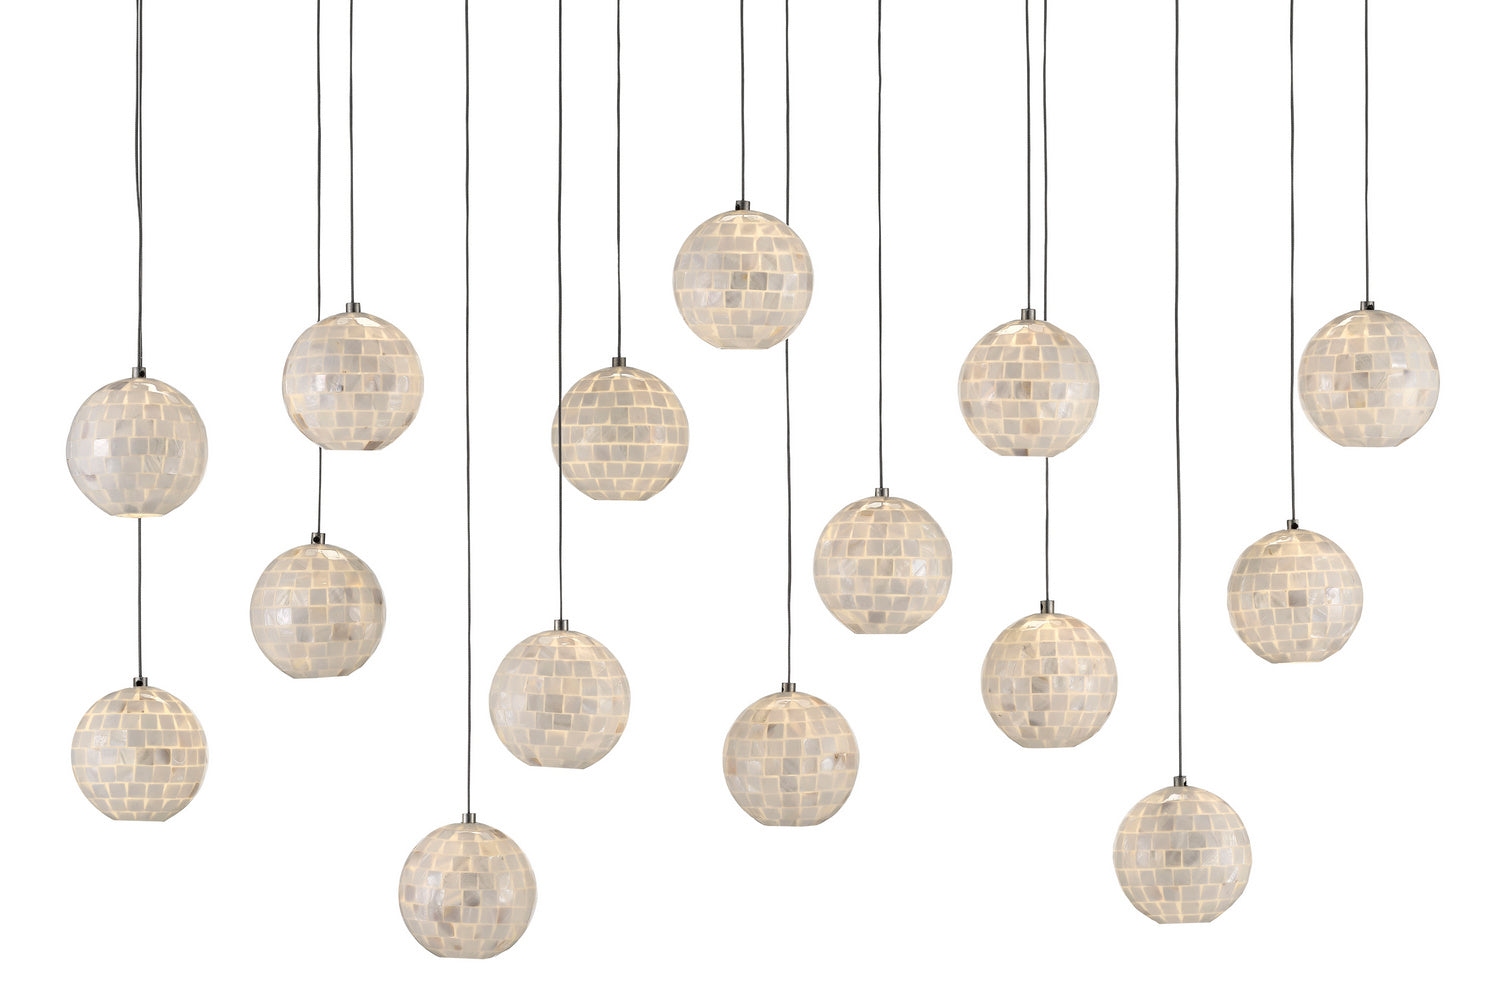 15 Light Pendant from the Finhorn collection in Painted Silver/Pearl finish